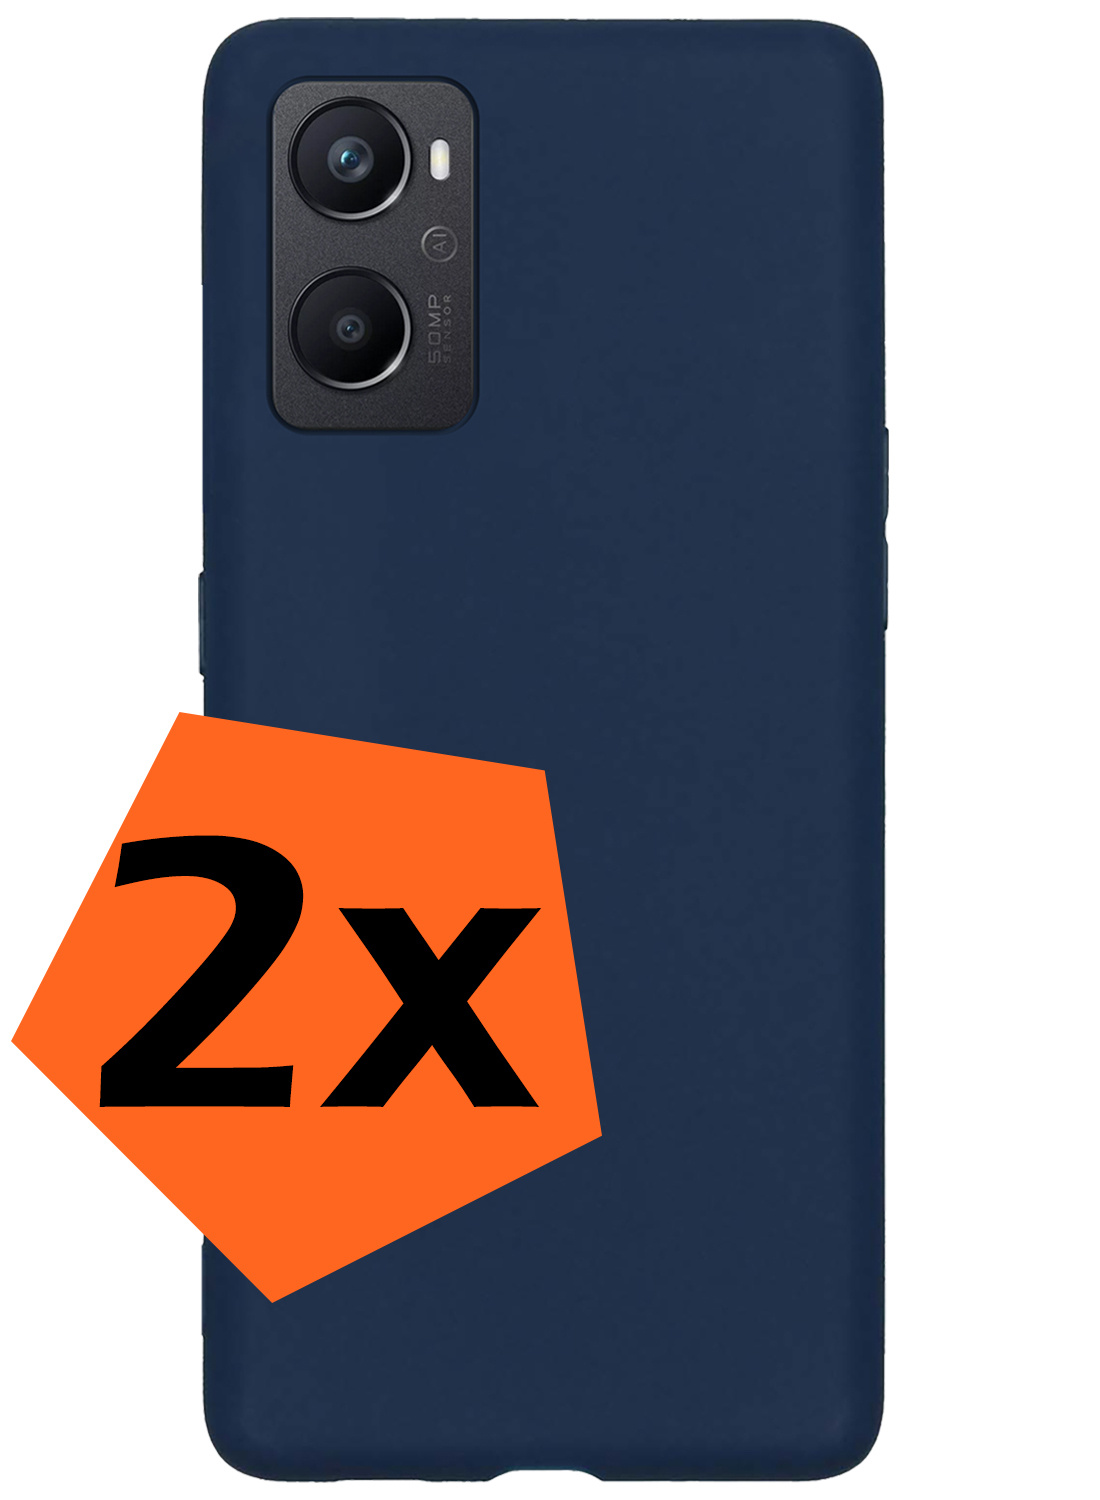 Nomfy OPPO A76 Hoesje Siliconen - OPPO A76 Hoesje Donker Blauw Case - OPPO A76 Cover Siliconen Back Cover - Donker Blauw 2 Stuks